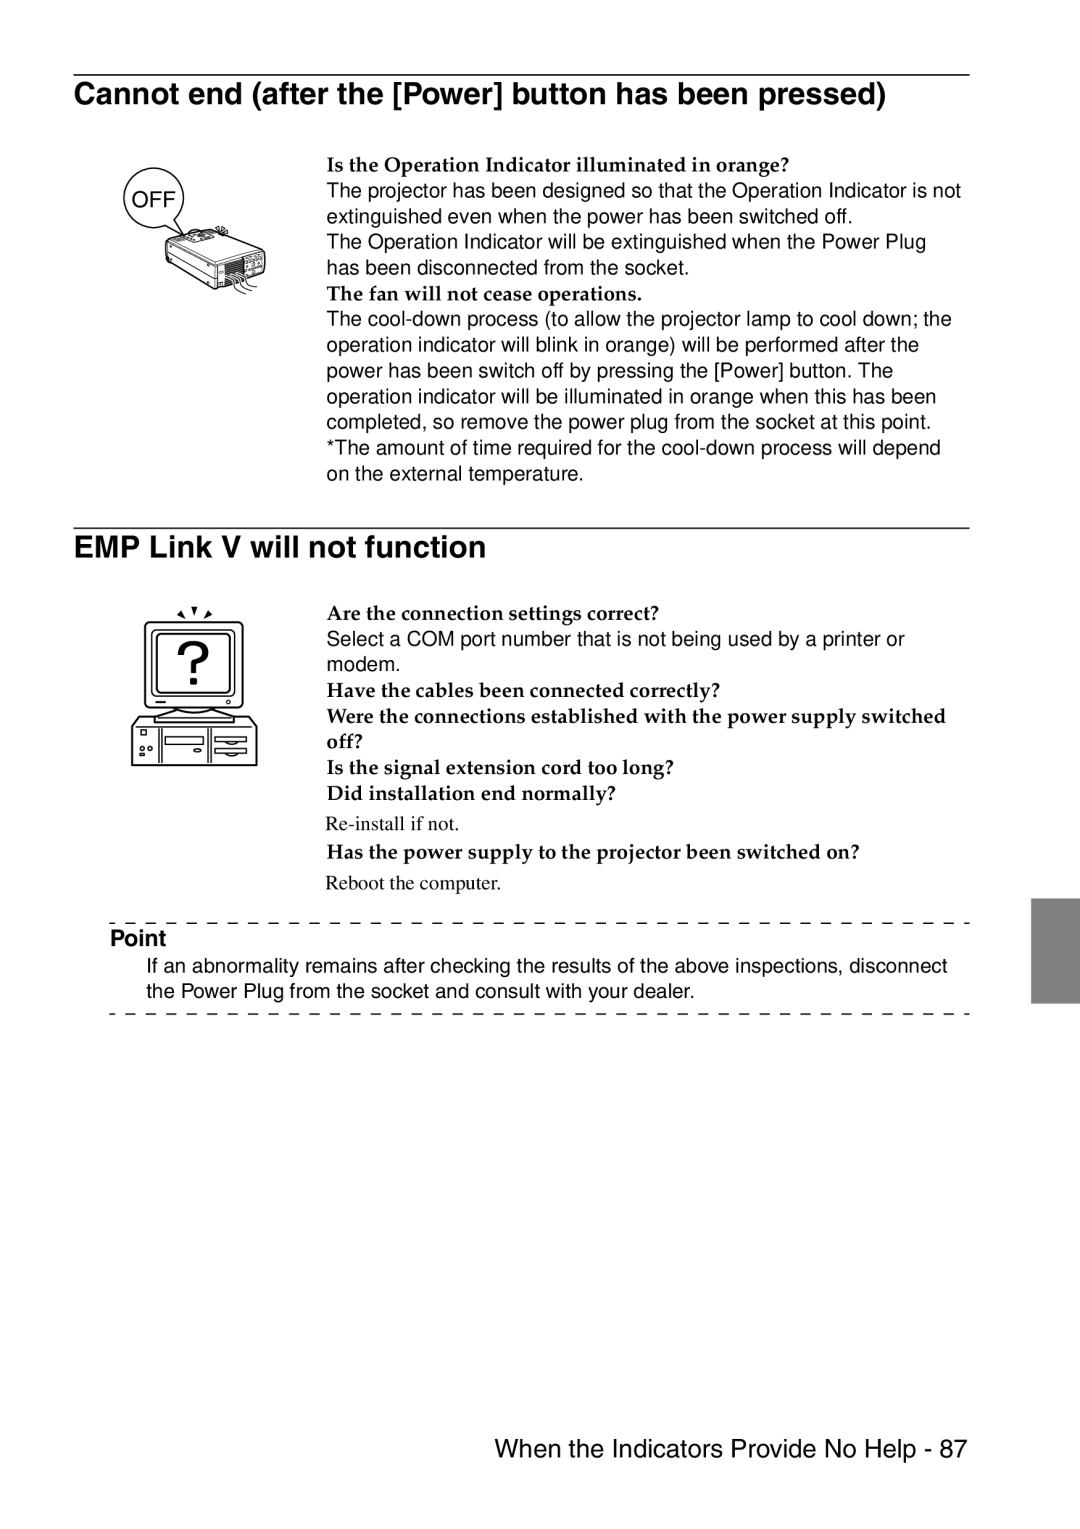 Epson 9100 manual Cannot end after the Power button has been pressed, EMP Link V will not function 